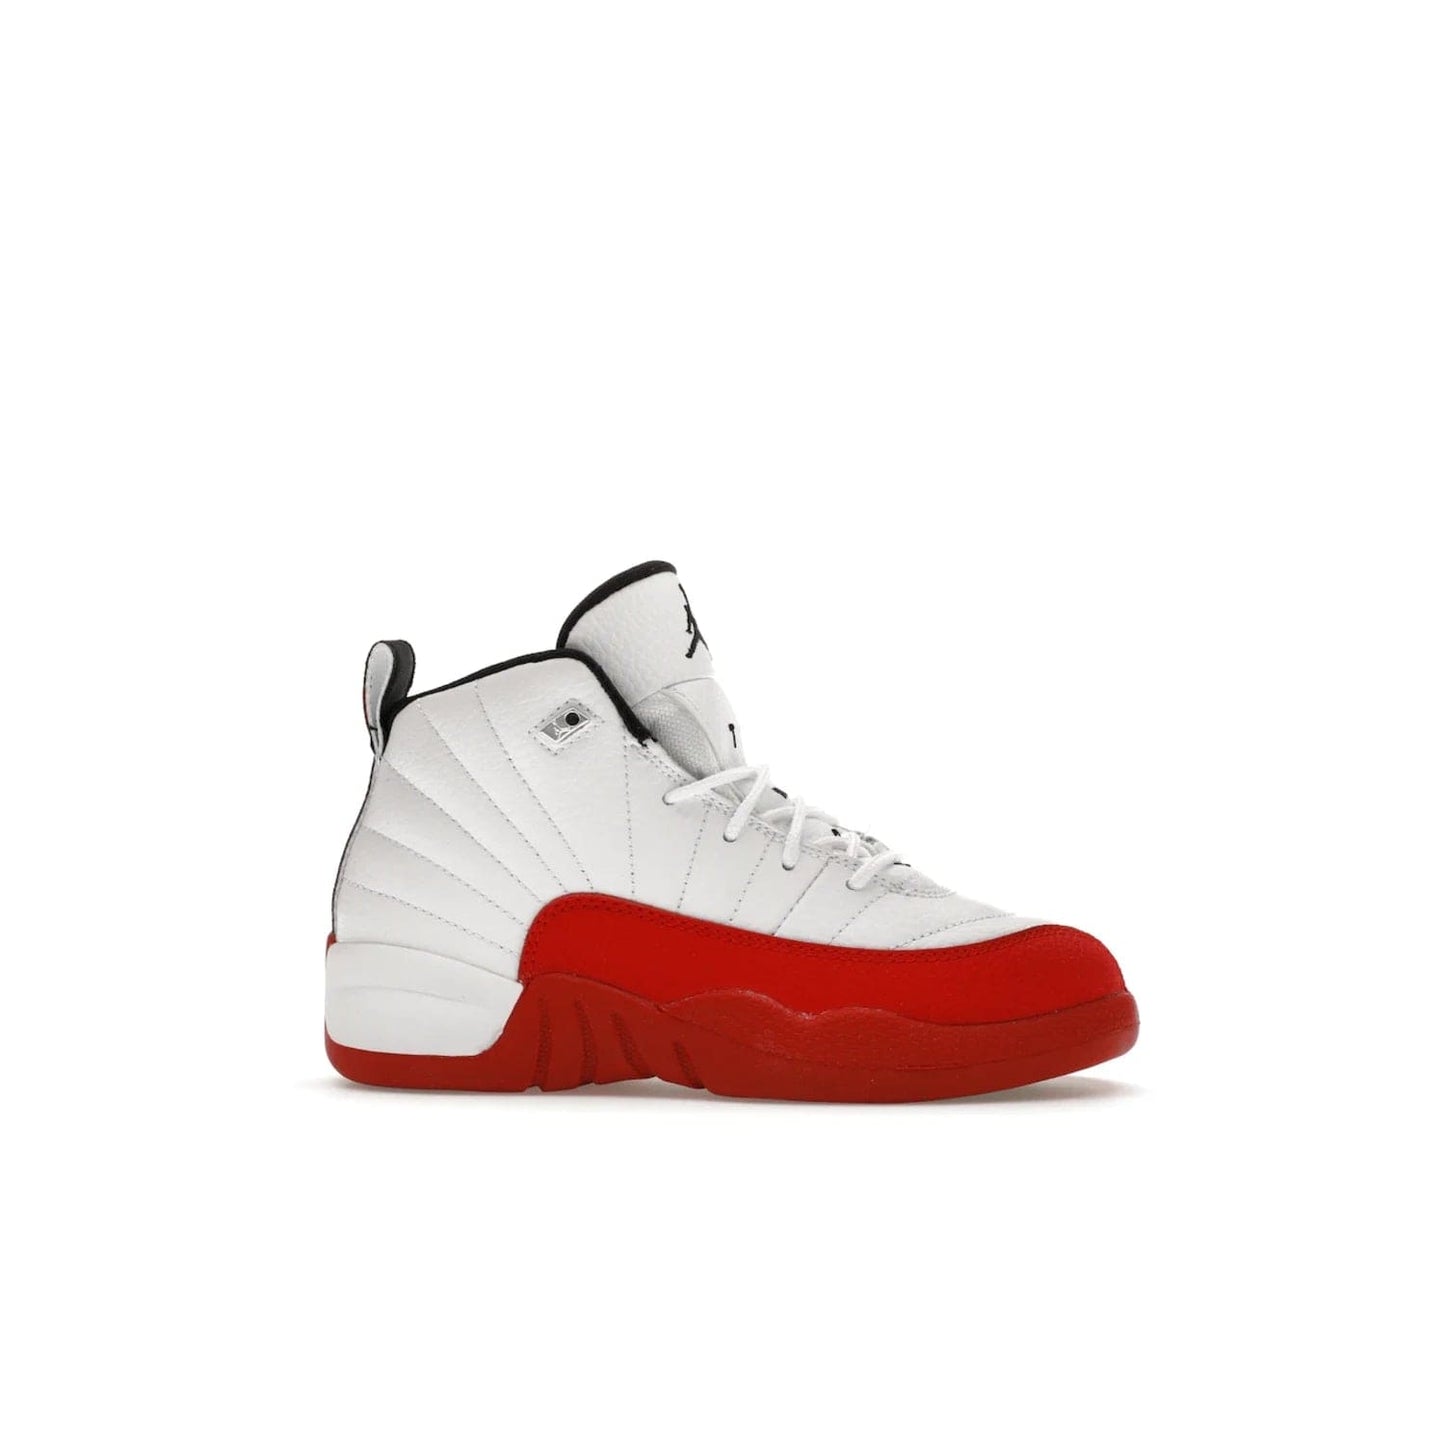 Jordan 12 Retro Cherry (2023) (PS) - Image 2 - Only at www.BallersClubKickz.com - Jordan 12 Retro Cherry dropping for toddlers in 2023! White leather upper with black overlays and red branding. Classic court style for your little one.